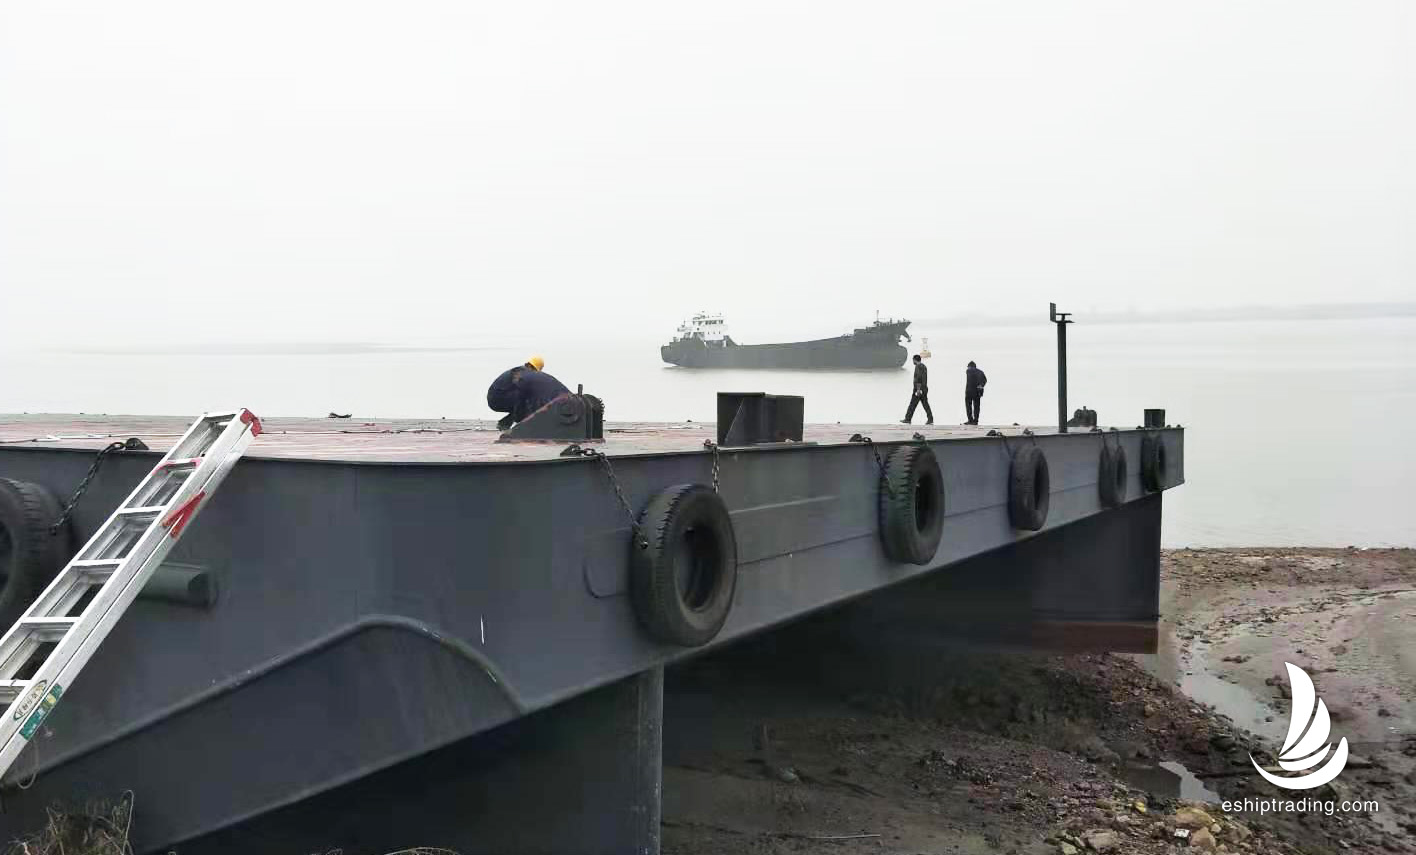 6000 T No Power Barge For Sale